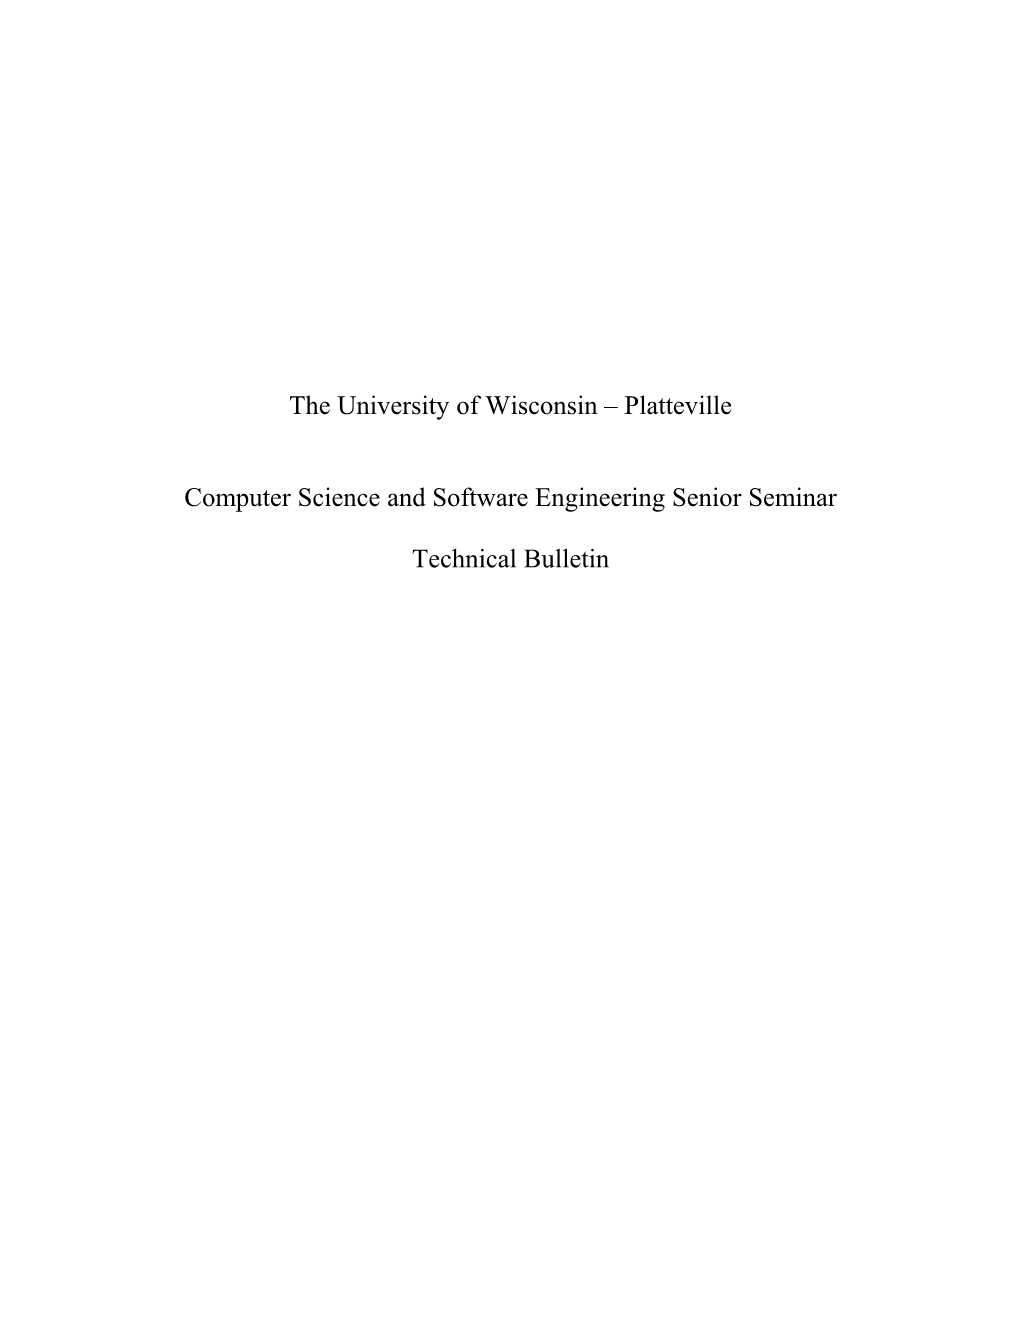 UWP Computer Science and Software Engineering Technical Report